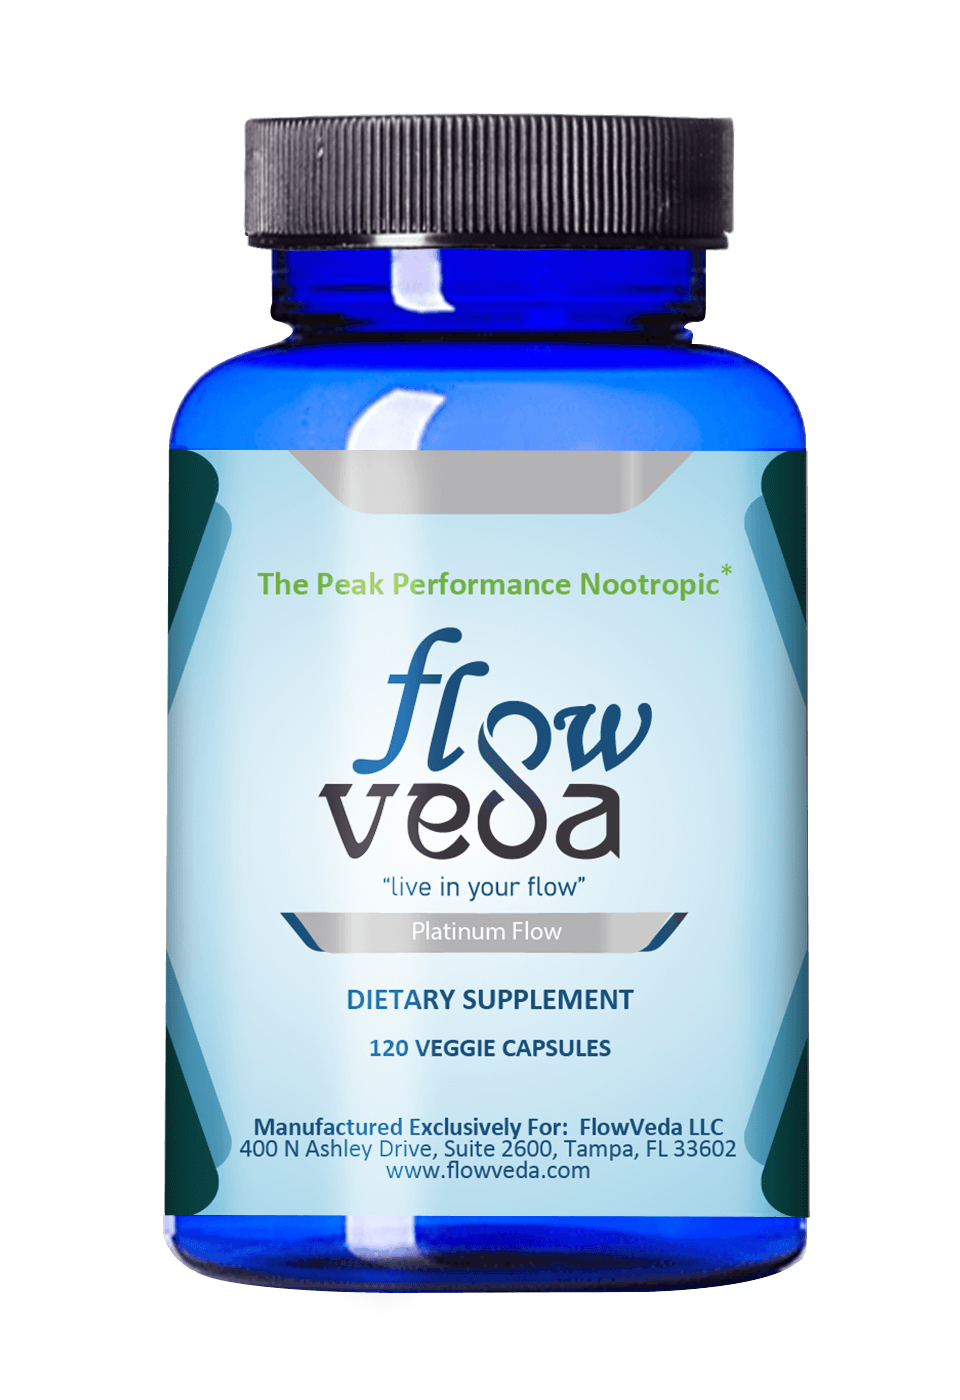 Platinum Flow Club is the premium Flow Club membership with a monthly and bi-monthly subscription option supplying members with four capsules per day for maximum FlowVeda results and benefits over time.